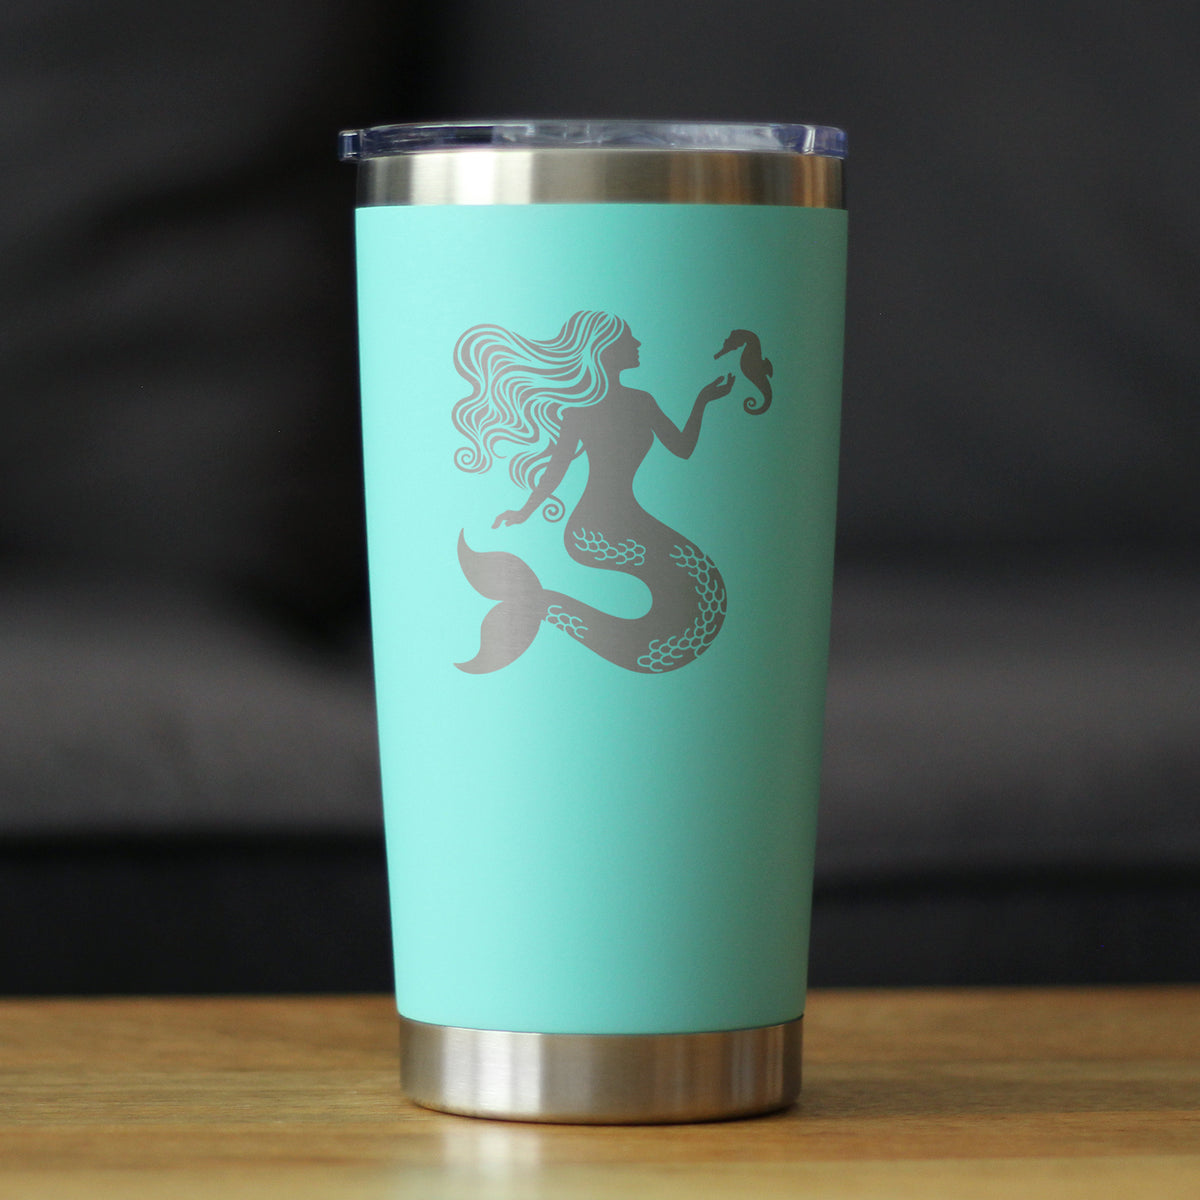 Mermaid - Insulated Coffee Tumbler Cup with Sliding Lid - Stainless Steel Travel Mug - Cute Mermaid Gifts for Women